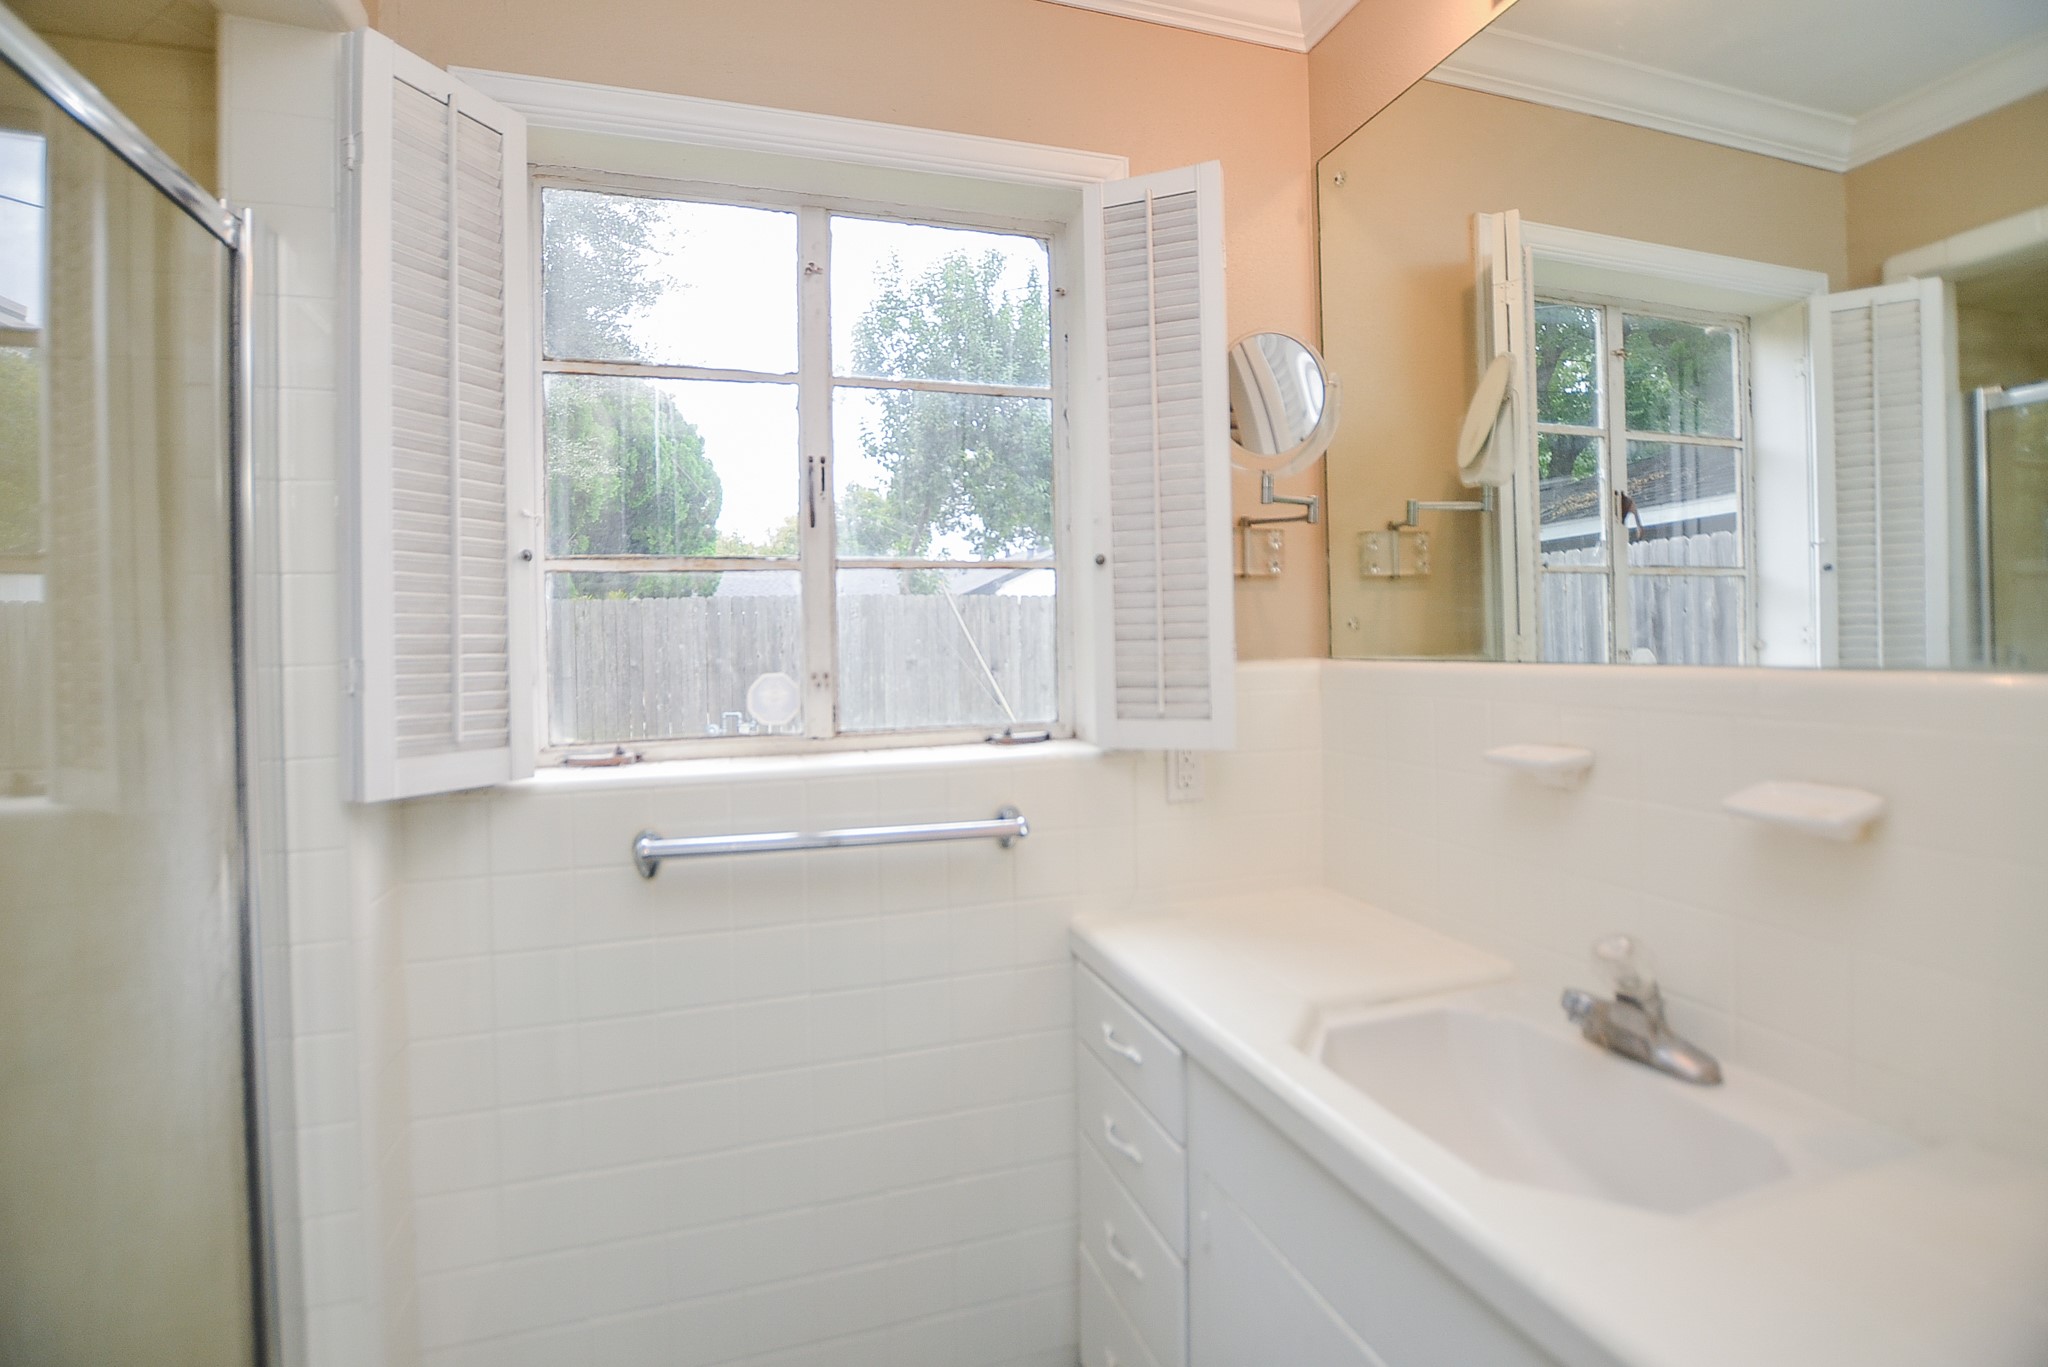 Spotless and sparkling, this second bath offers the same relaxing amenities of its primary counterpart.